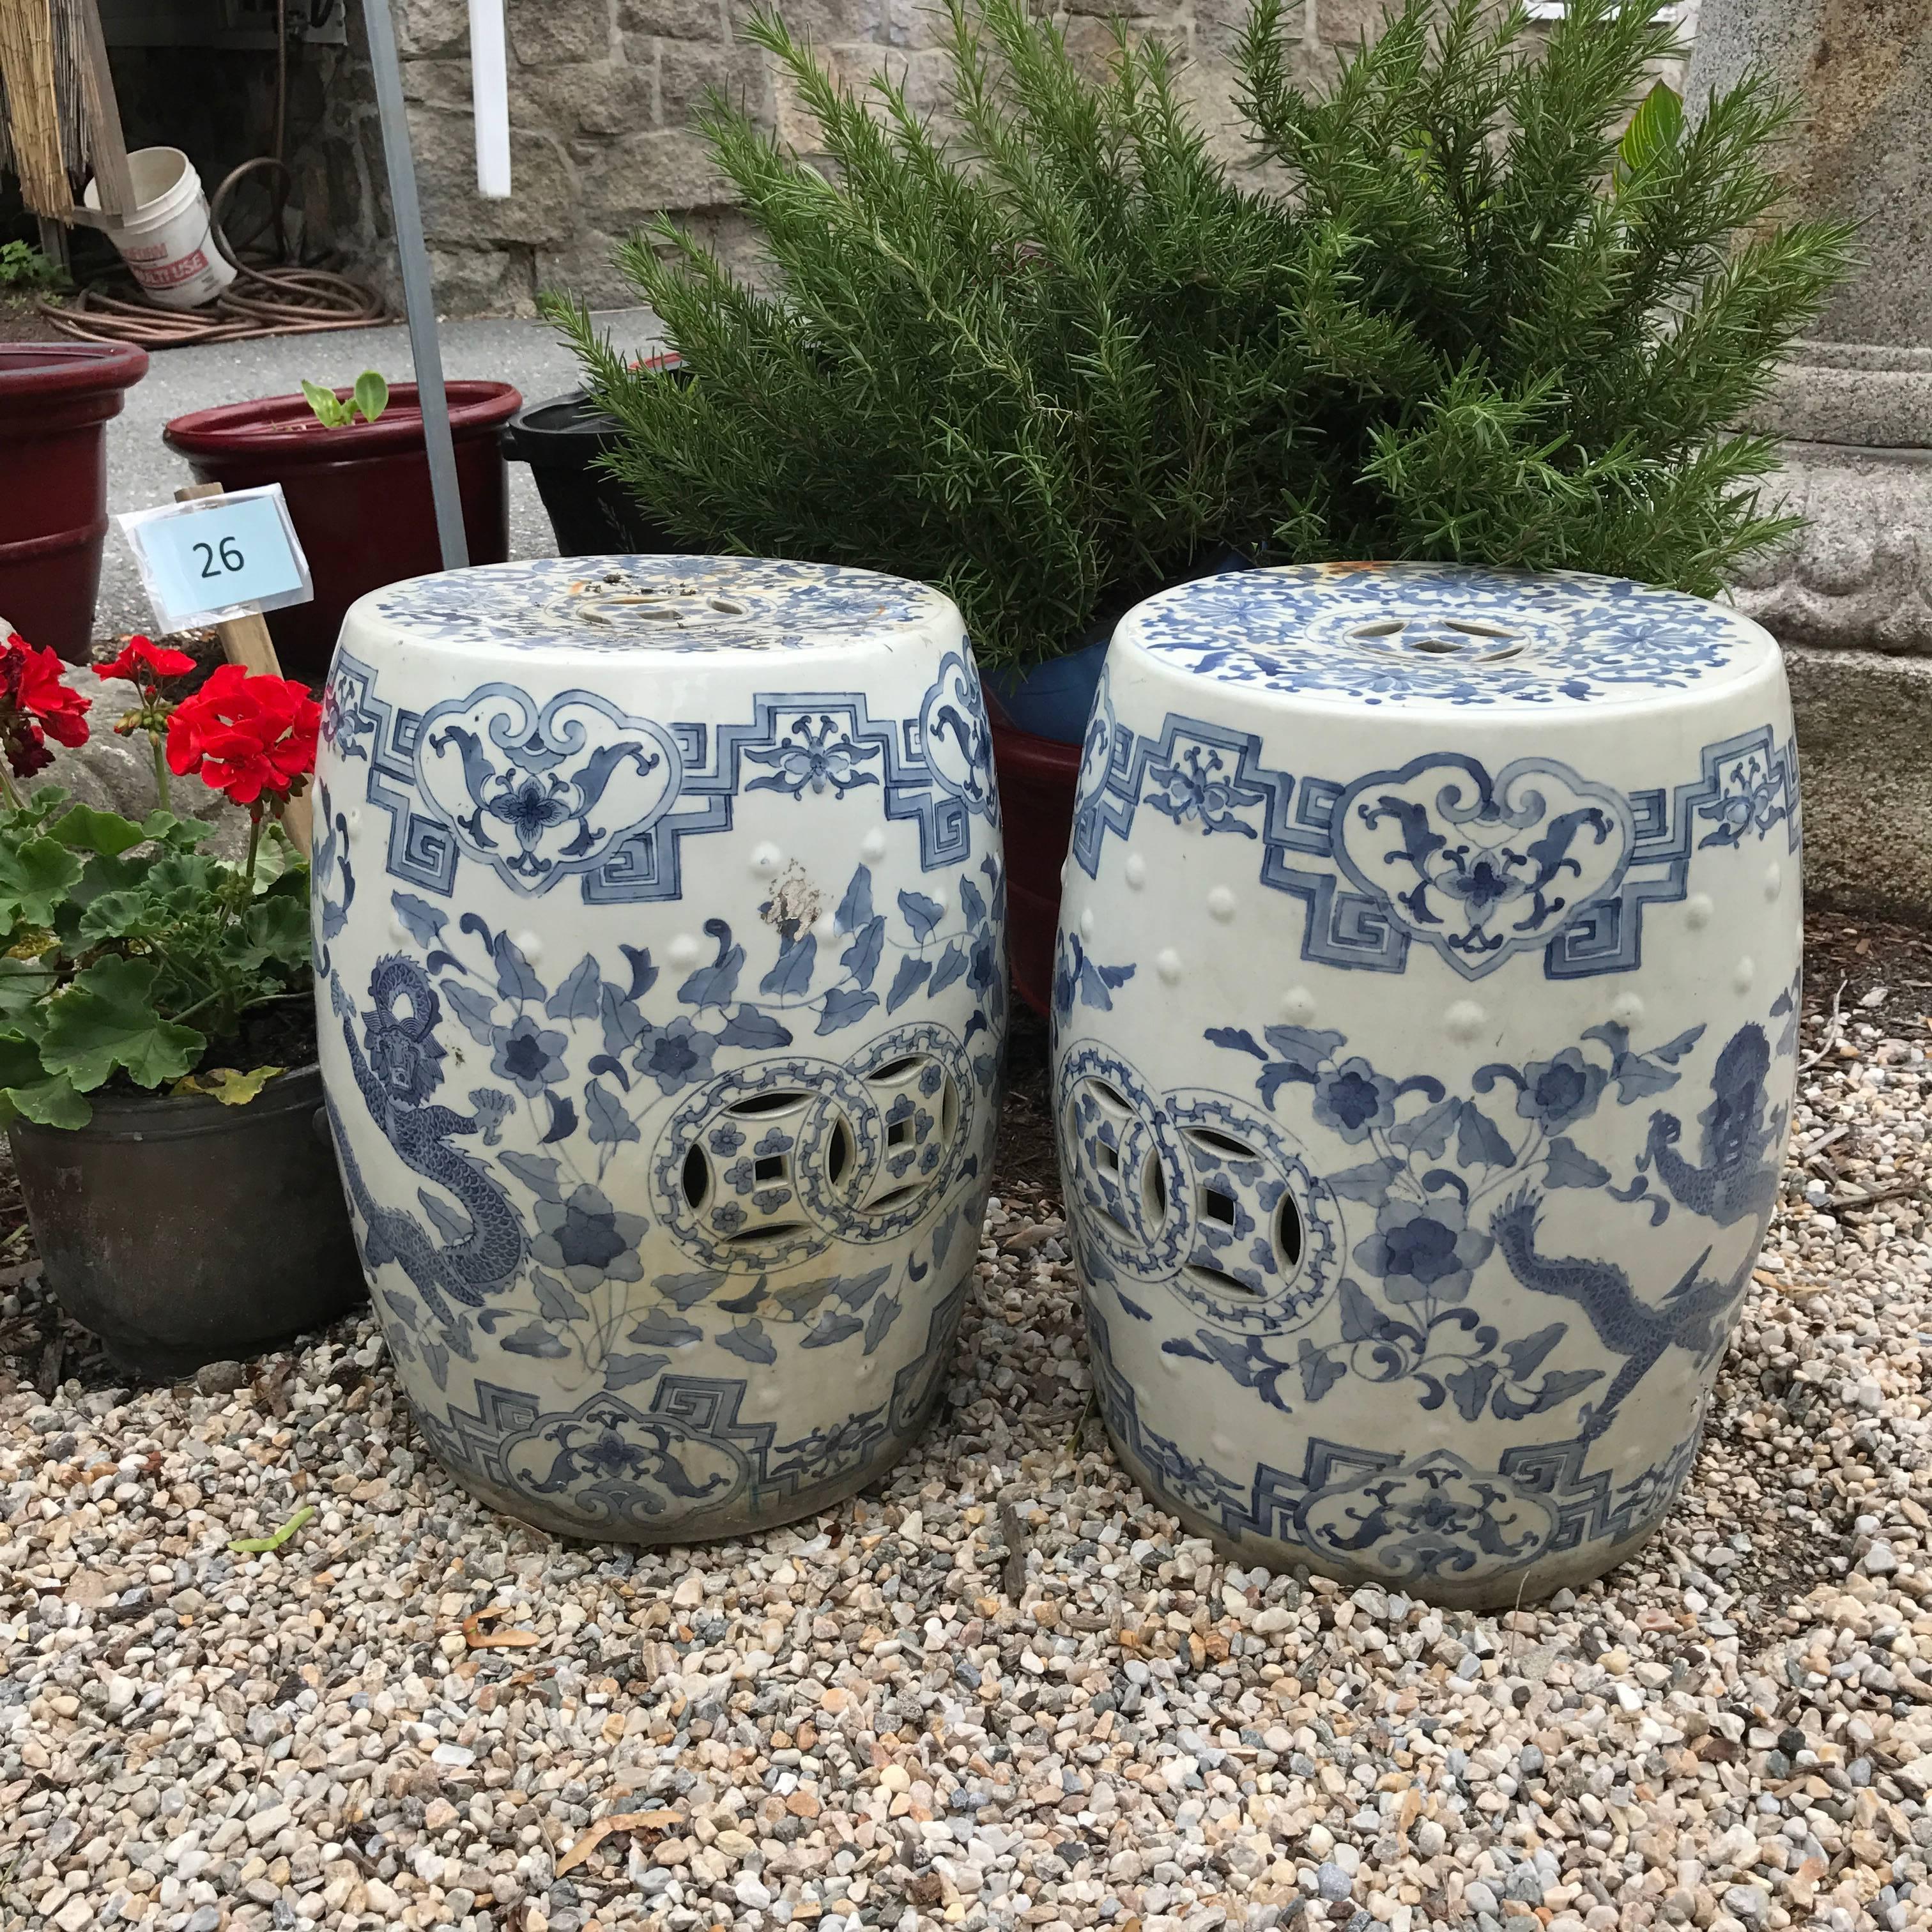 Chinese antique hand-painted blue and white garden stools (garden seats), ornately hand painted pair in a prolific floral and mountain scape design.

These attractive heavy, thick ceramic stools make excellent portable seats or serve as attractive